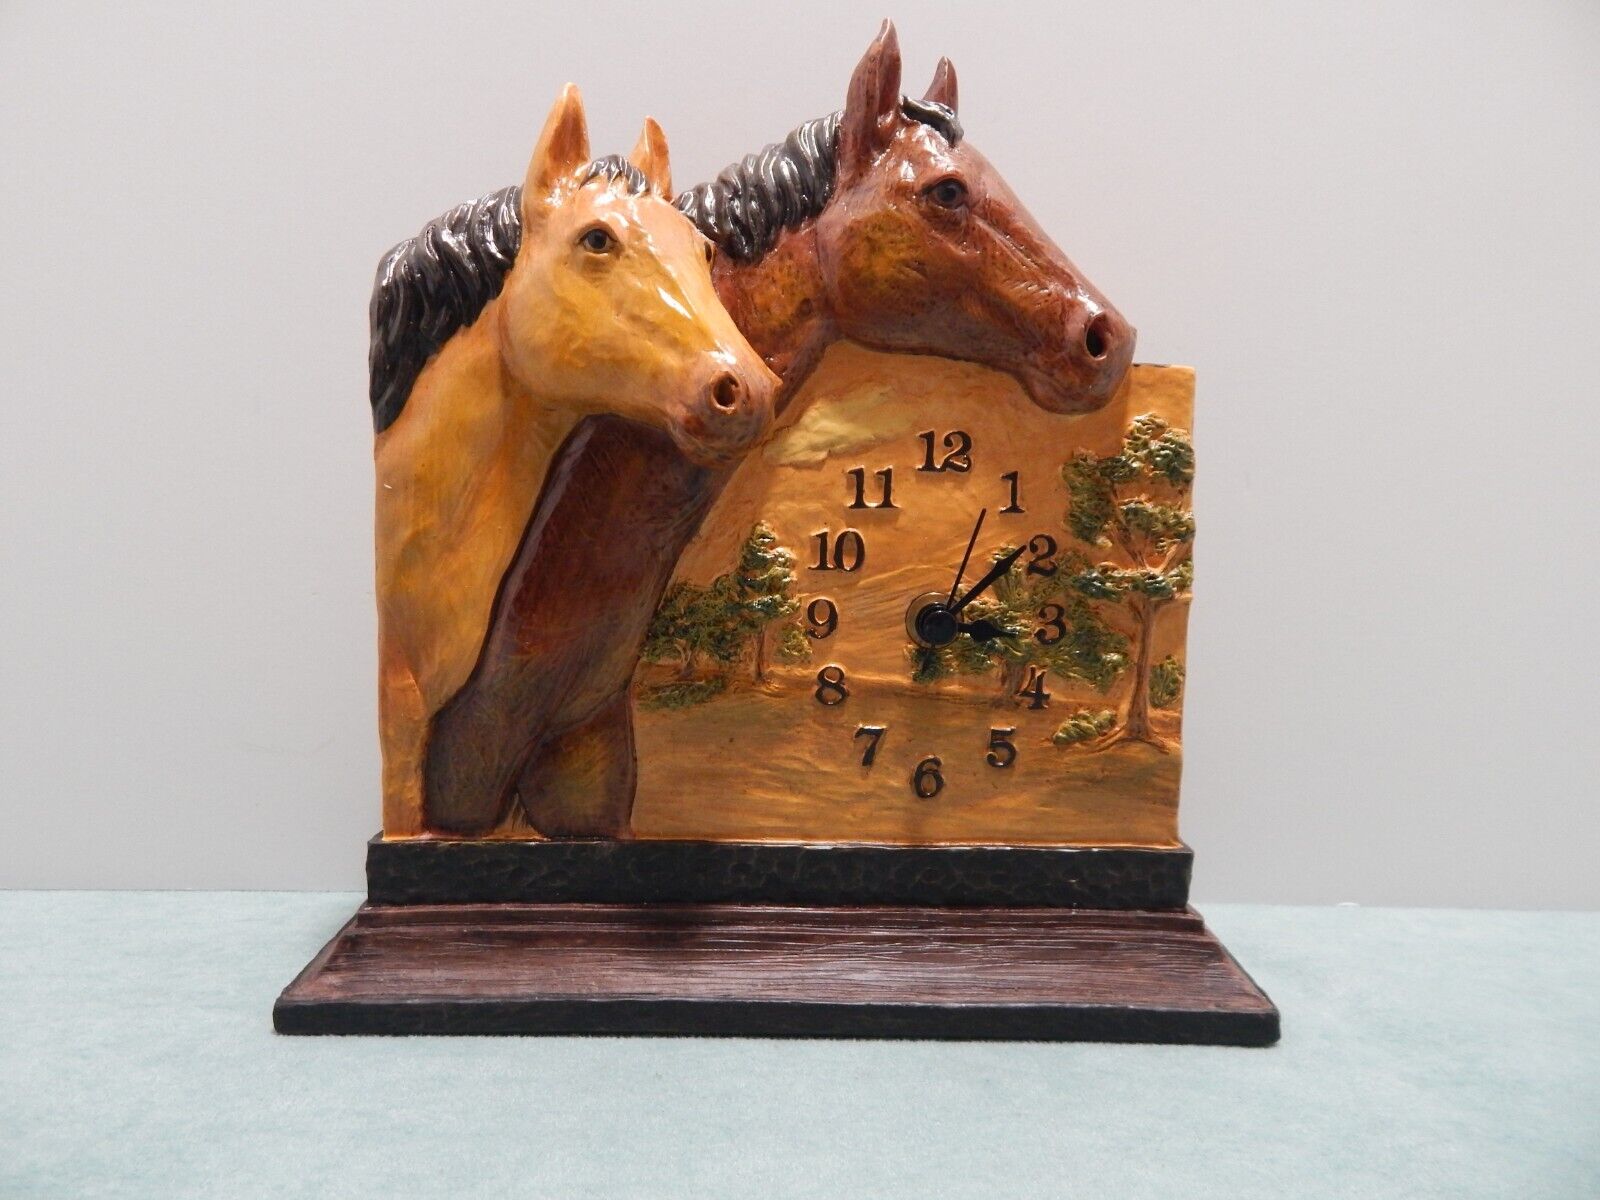 Vintage Horse Themed Accent Clock by Horiage 2002 Figi Graphics Resin New in Box